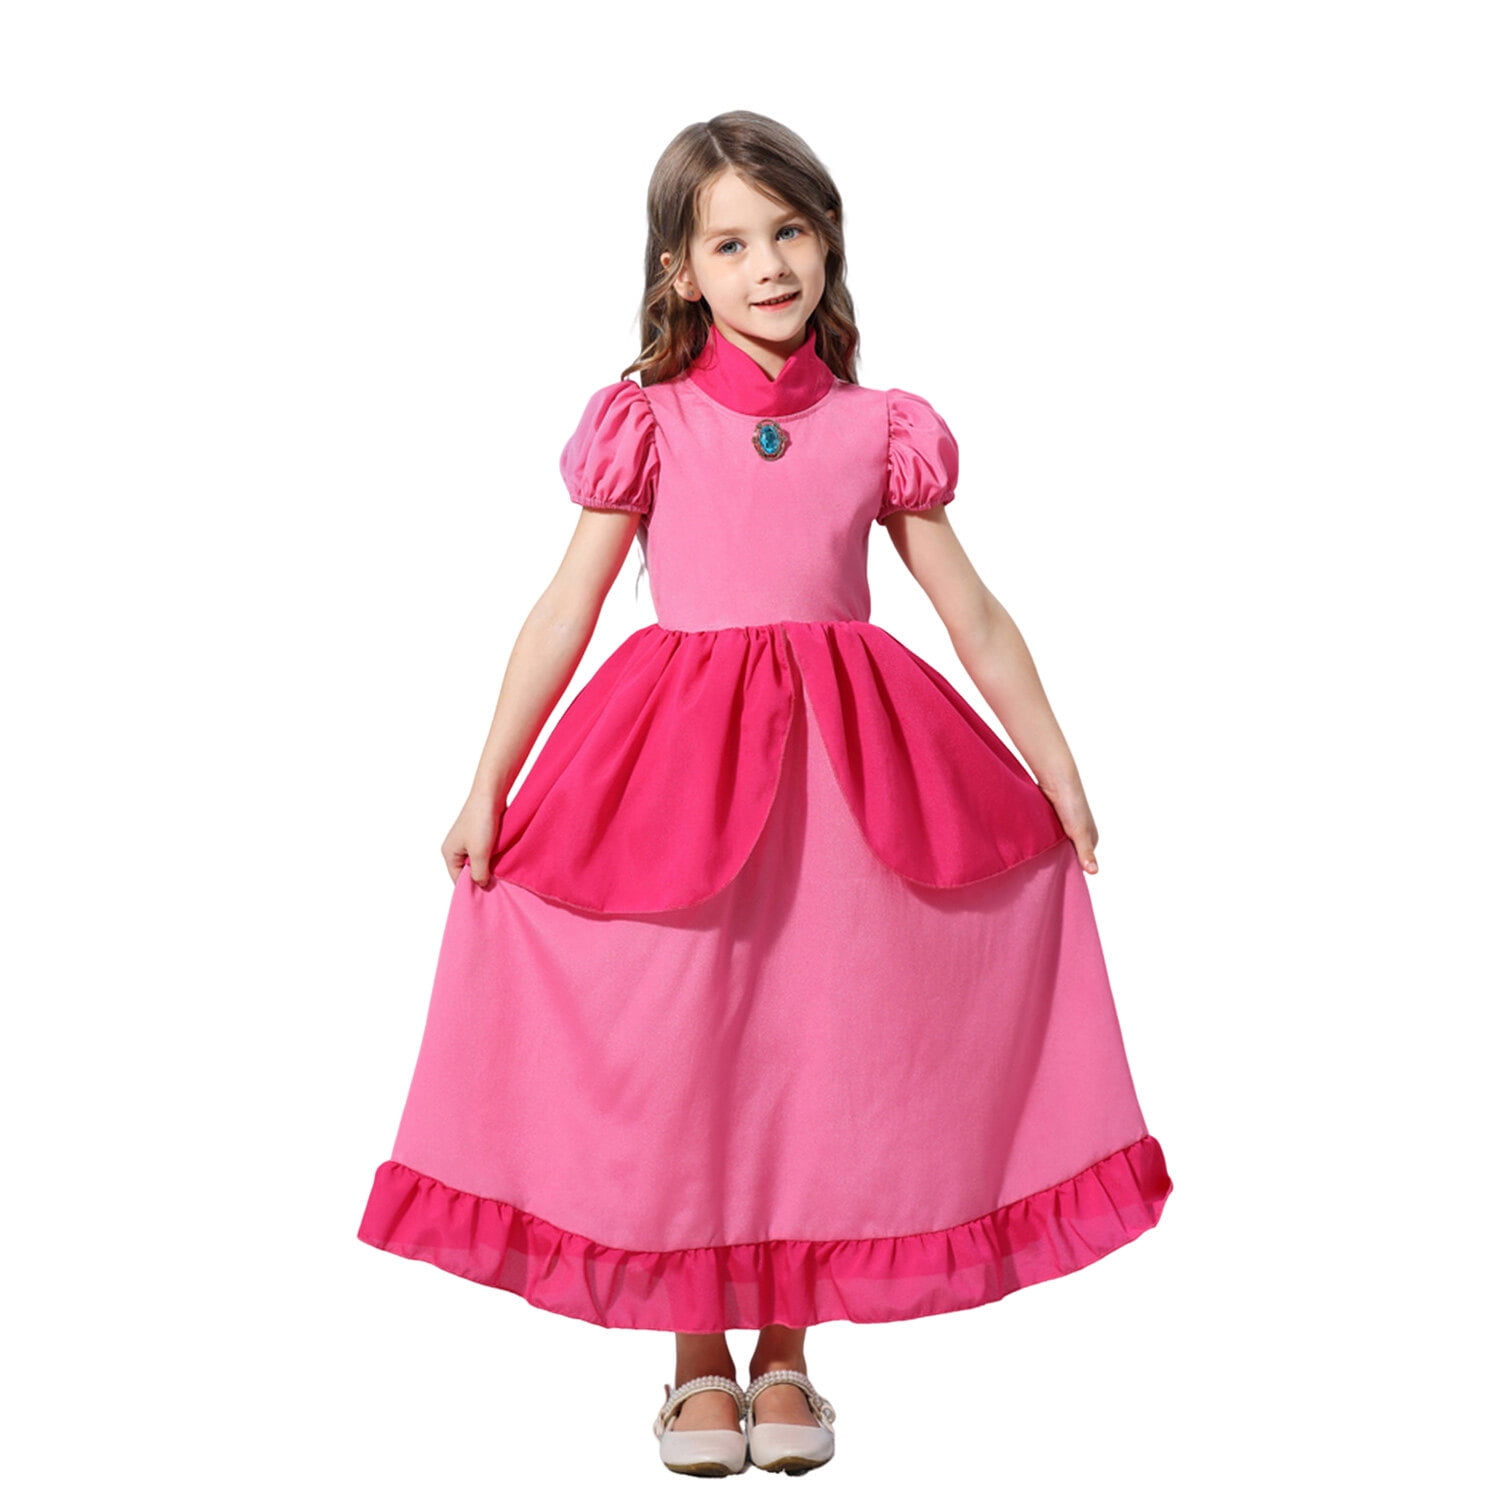 Acquista Peach Princess Dress for Girl Children Stage Performance Clothes  Kids Carnival Birthday Party Revelry Festival Cosplay